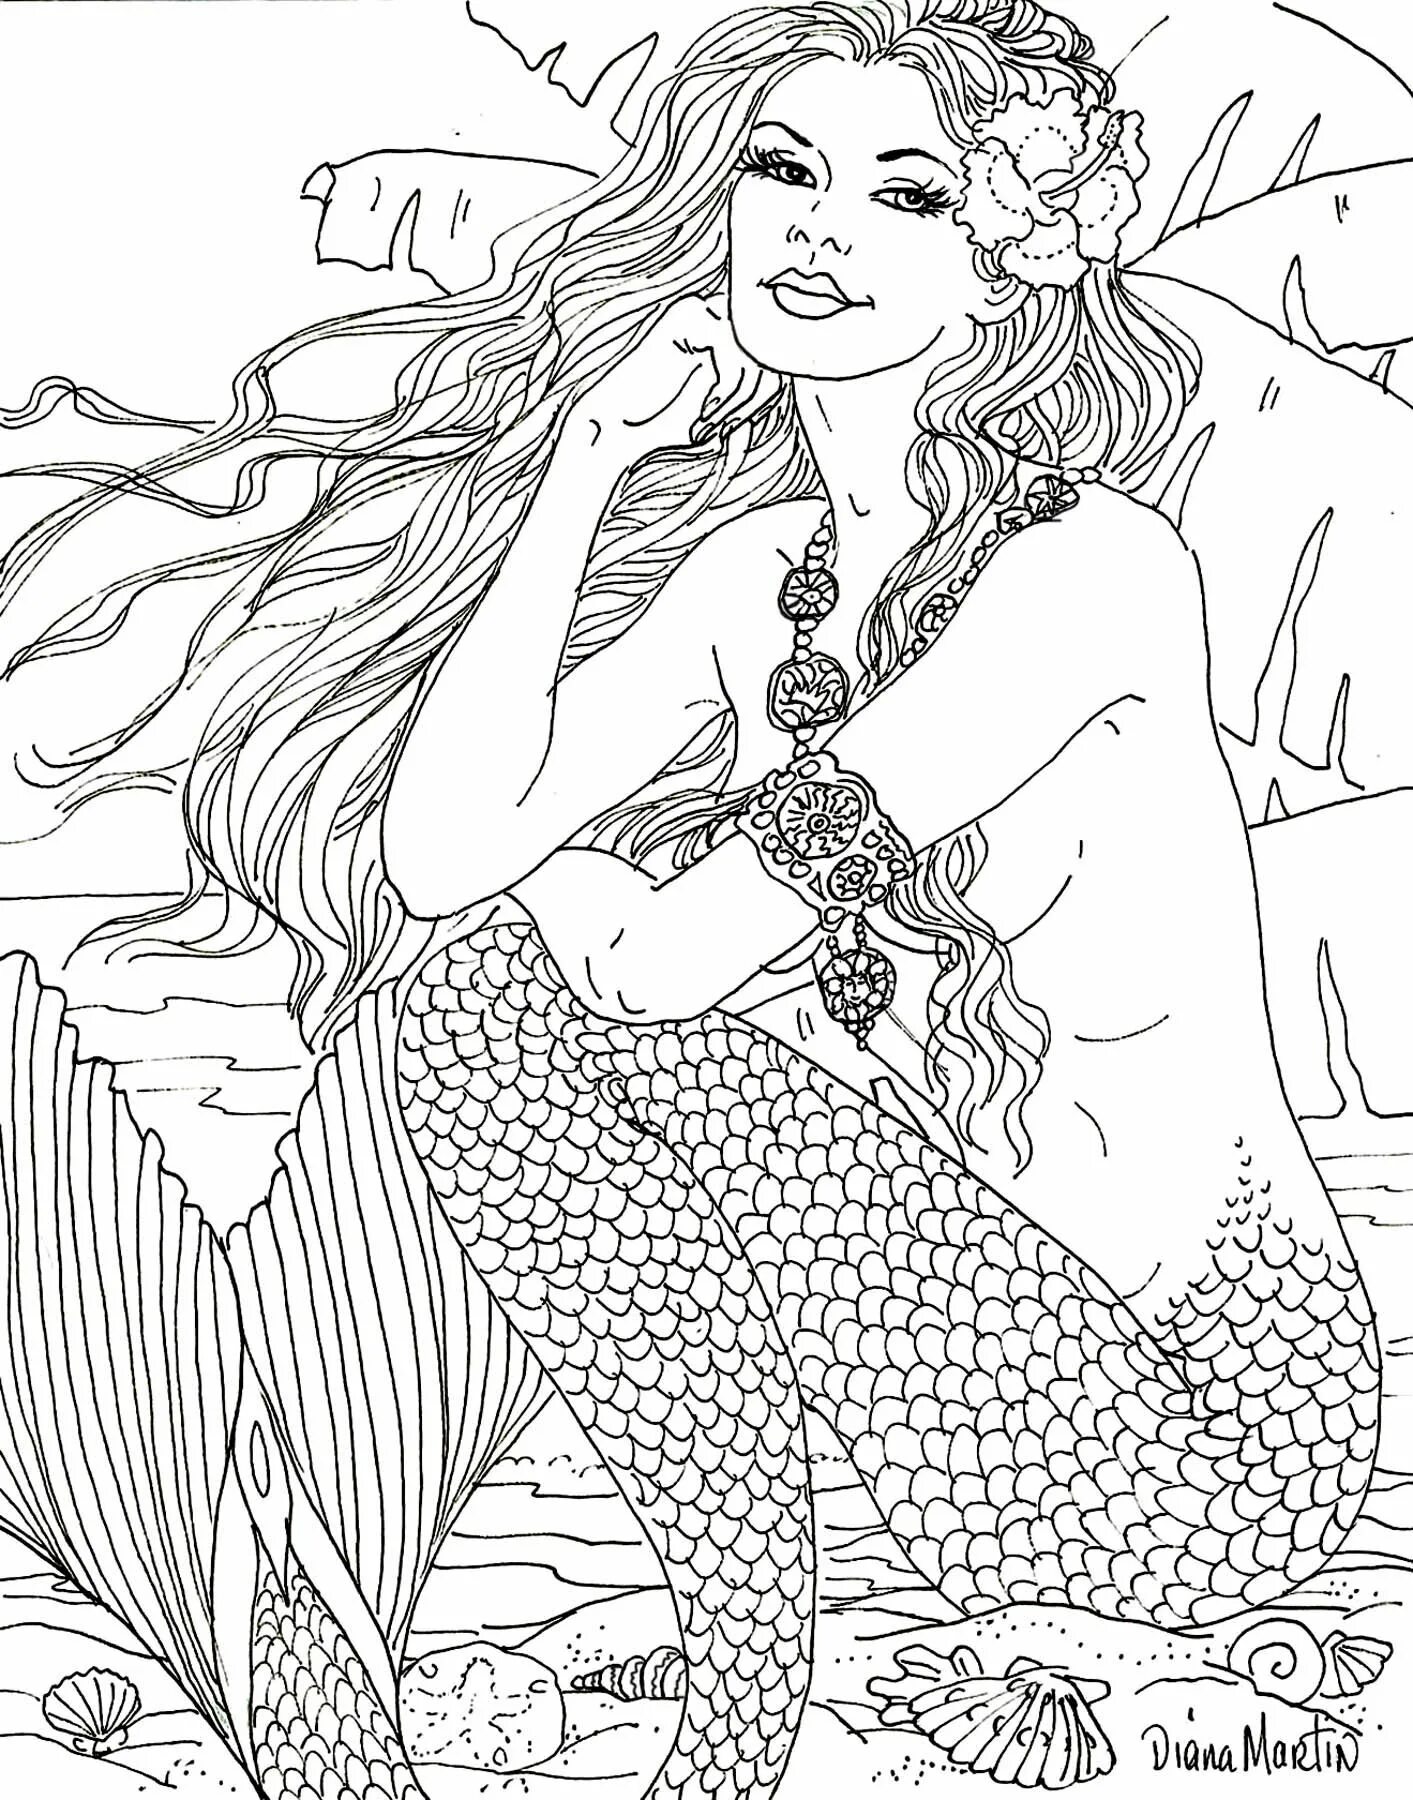 Exalted coloring page mermaid complex